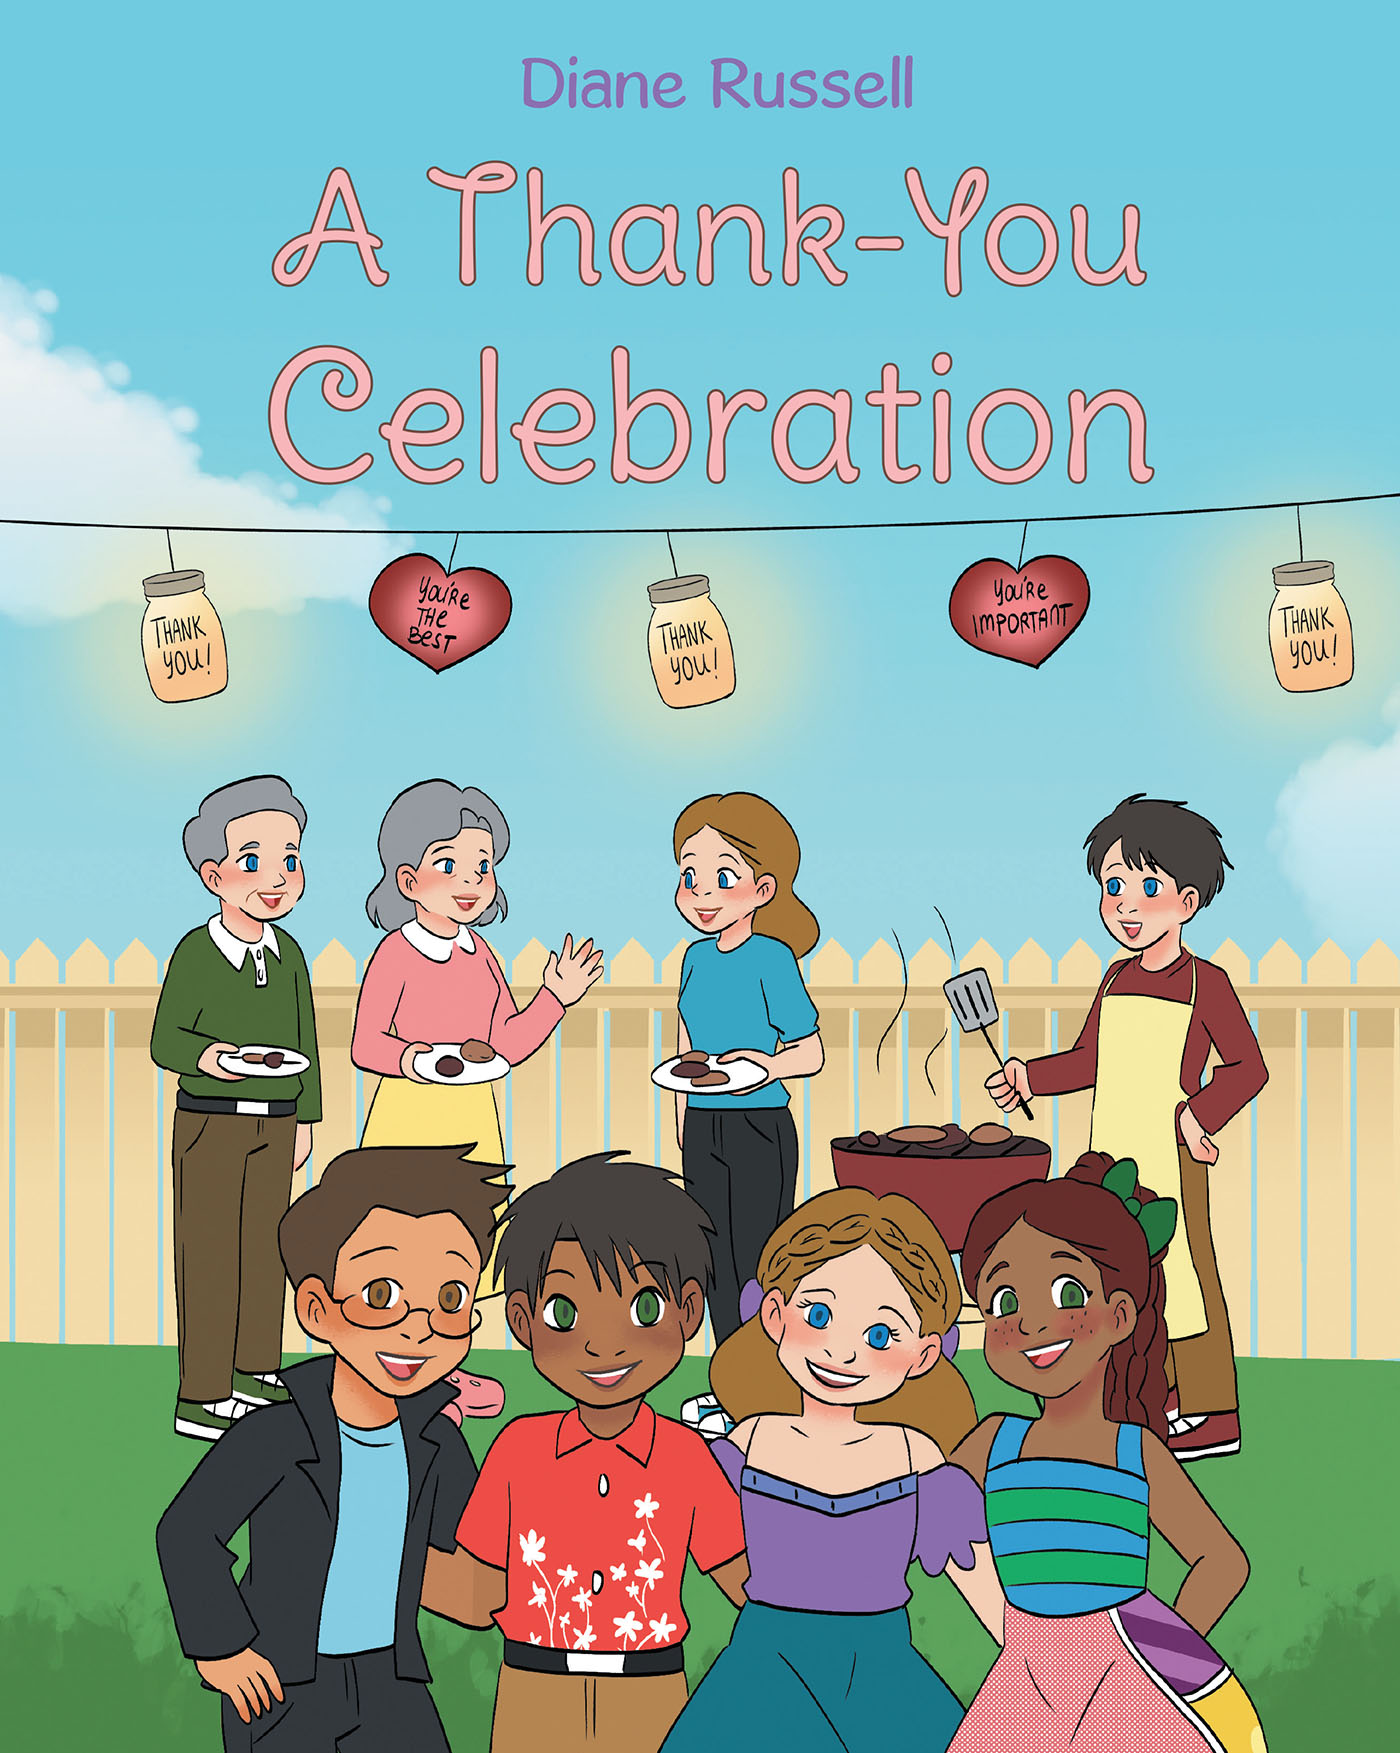 Author Diane Russell’s New Book, "A Thank You Celebration," Follows a Young Girl as She Prepares for a Special Party to Thank Her Parents for All They’ve Taught Her